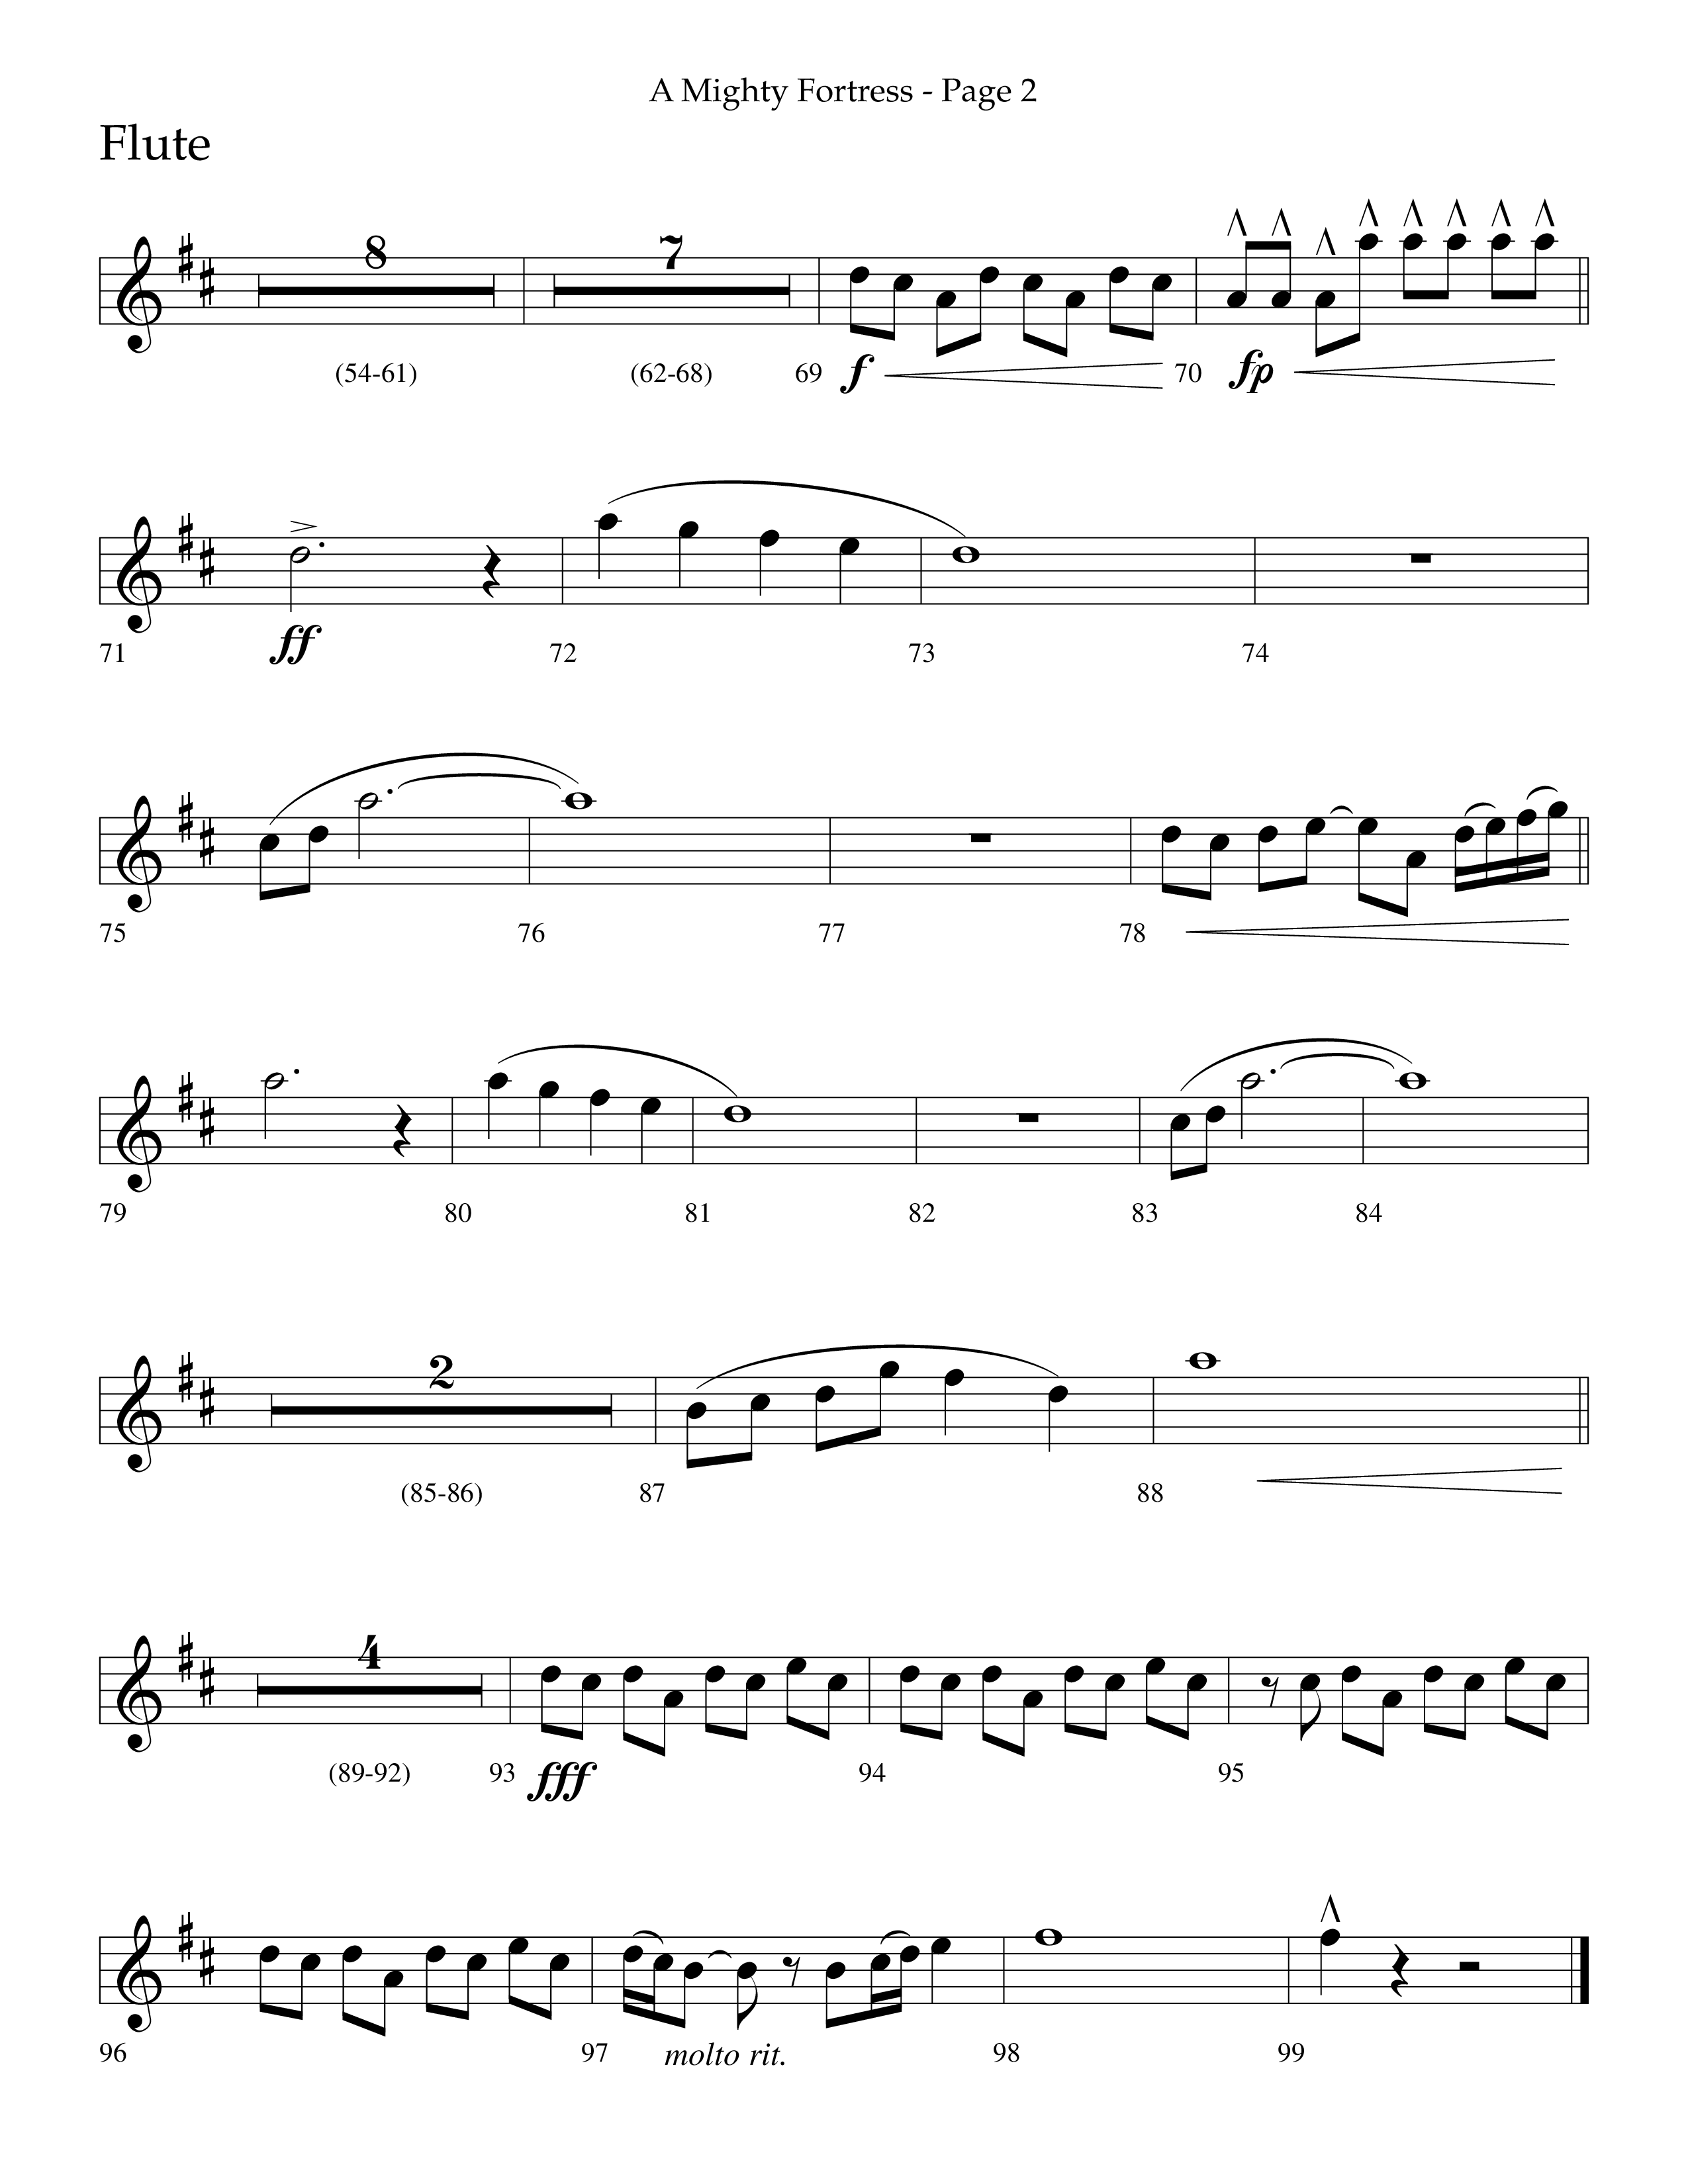 A Mighty Fortress (Choral Anthem SATB) Flute (Lifeway Choral / Arr. Cliff Duren)